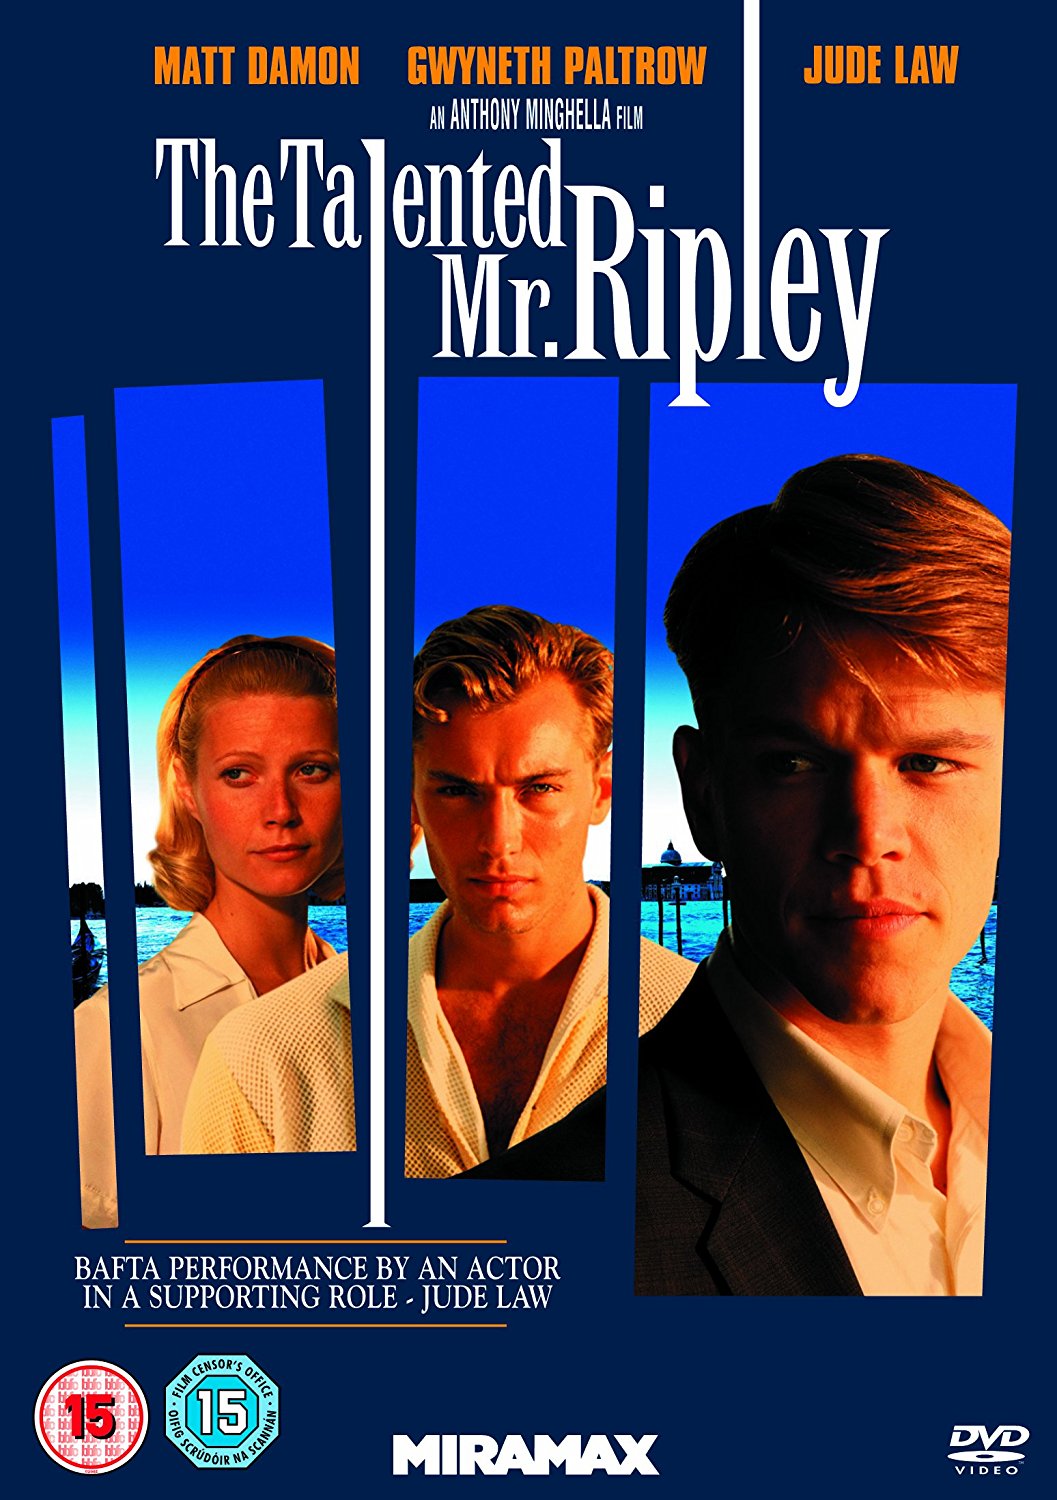 The Talented Mr. Ripley | Anthony Minghella